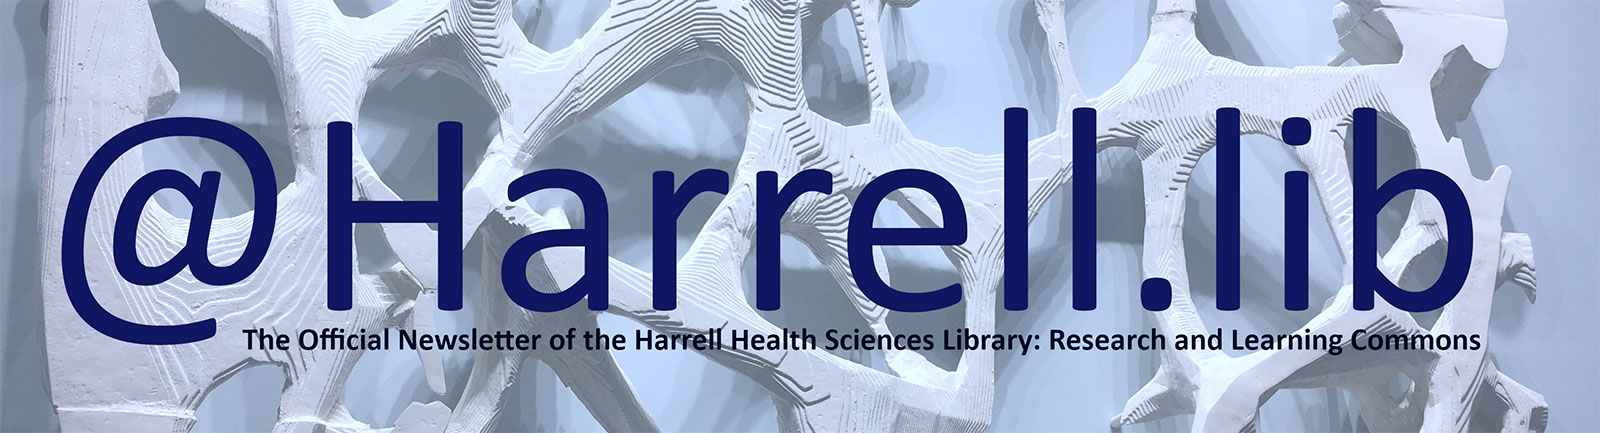 An image says @Harrell.lib: The Official Newsletter of the Harrell Health Sciences Library: A Research and Learning Commons.